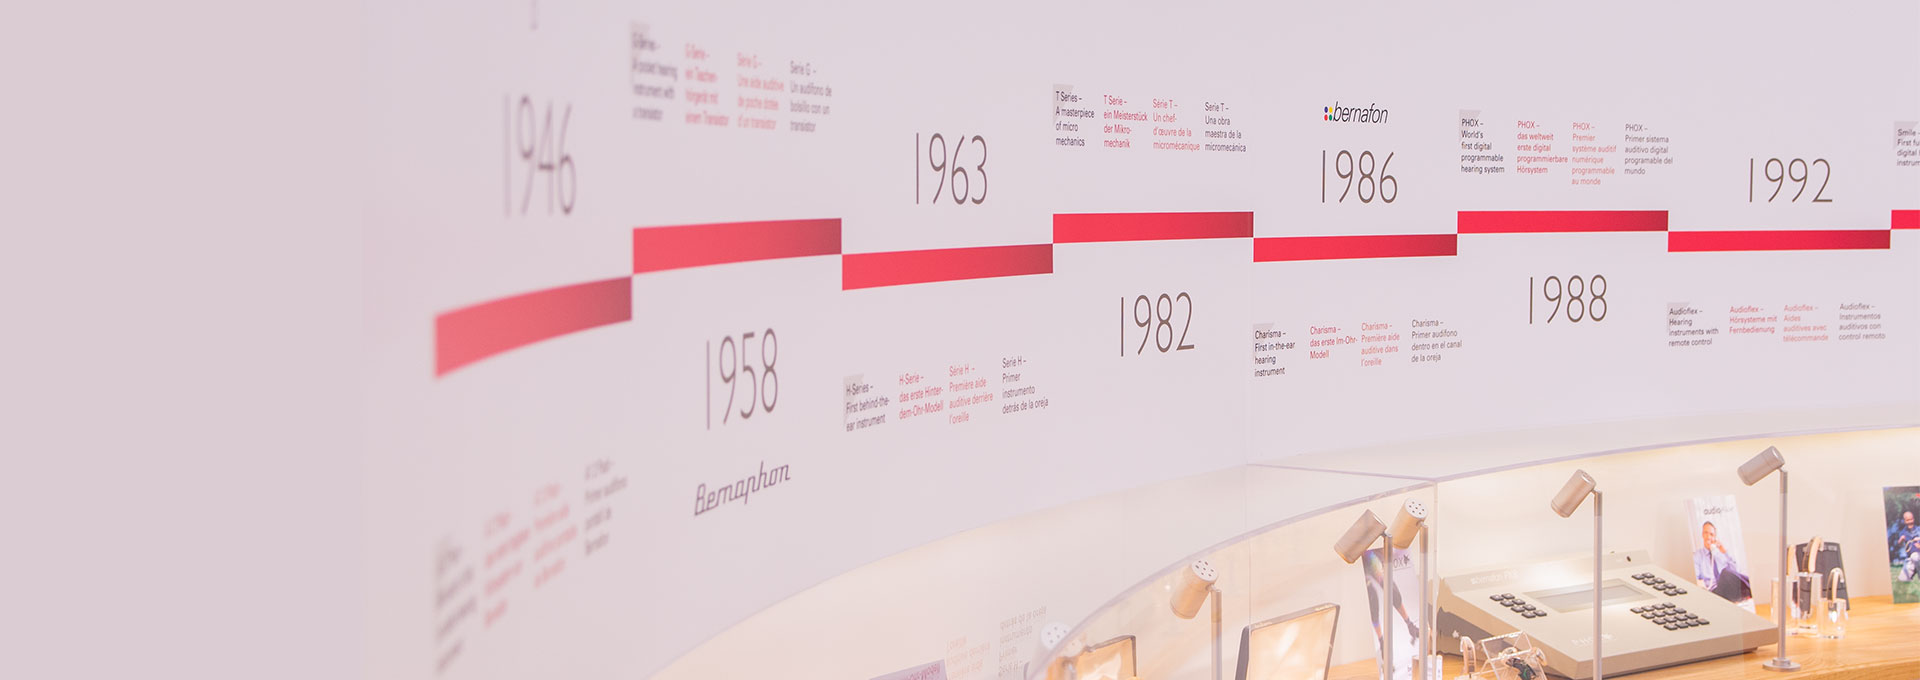 Picture of a section of the Bernafon corporate history timeline (1946 to 1992) exhibited at headquarters